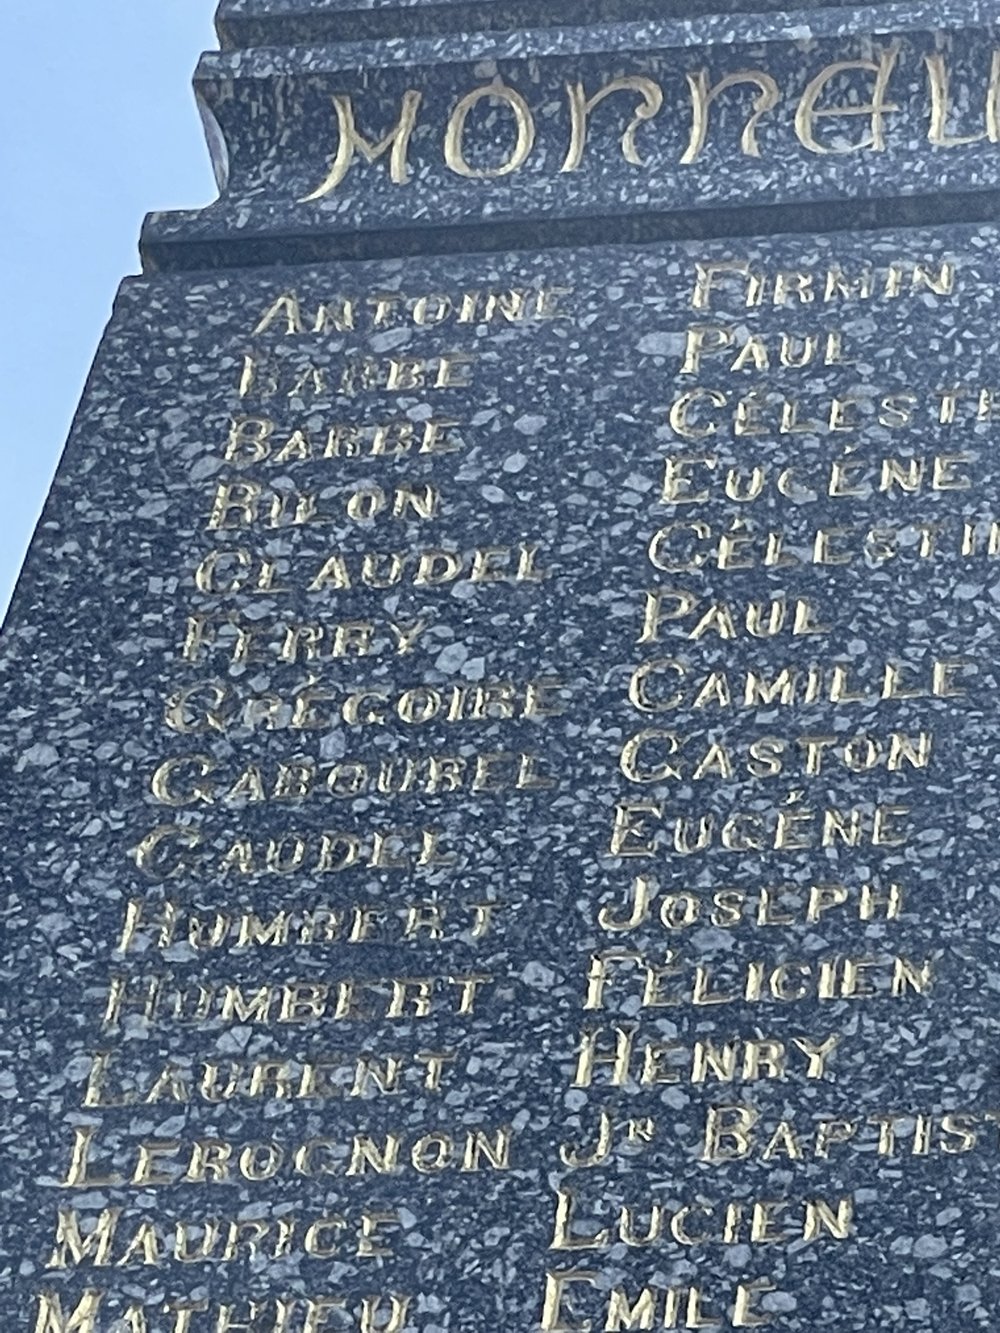 Gaston Gabourel is listed 8th from the top.